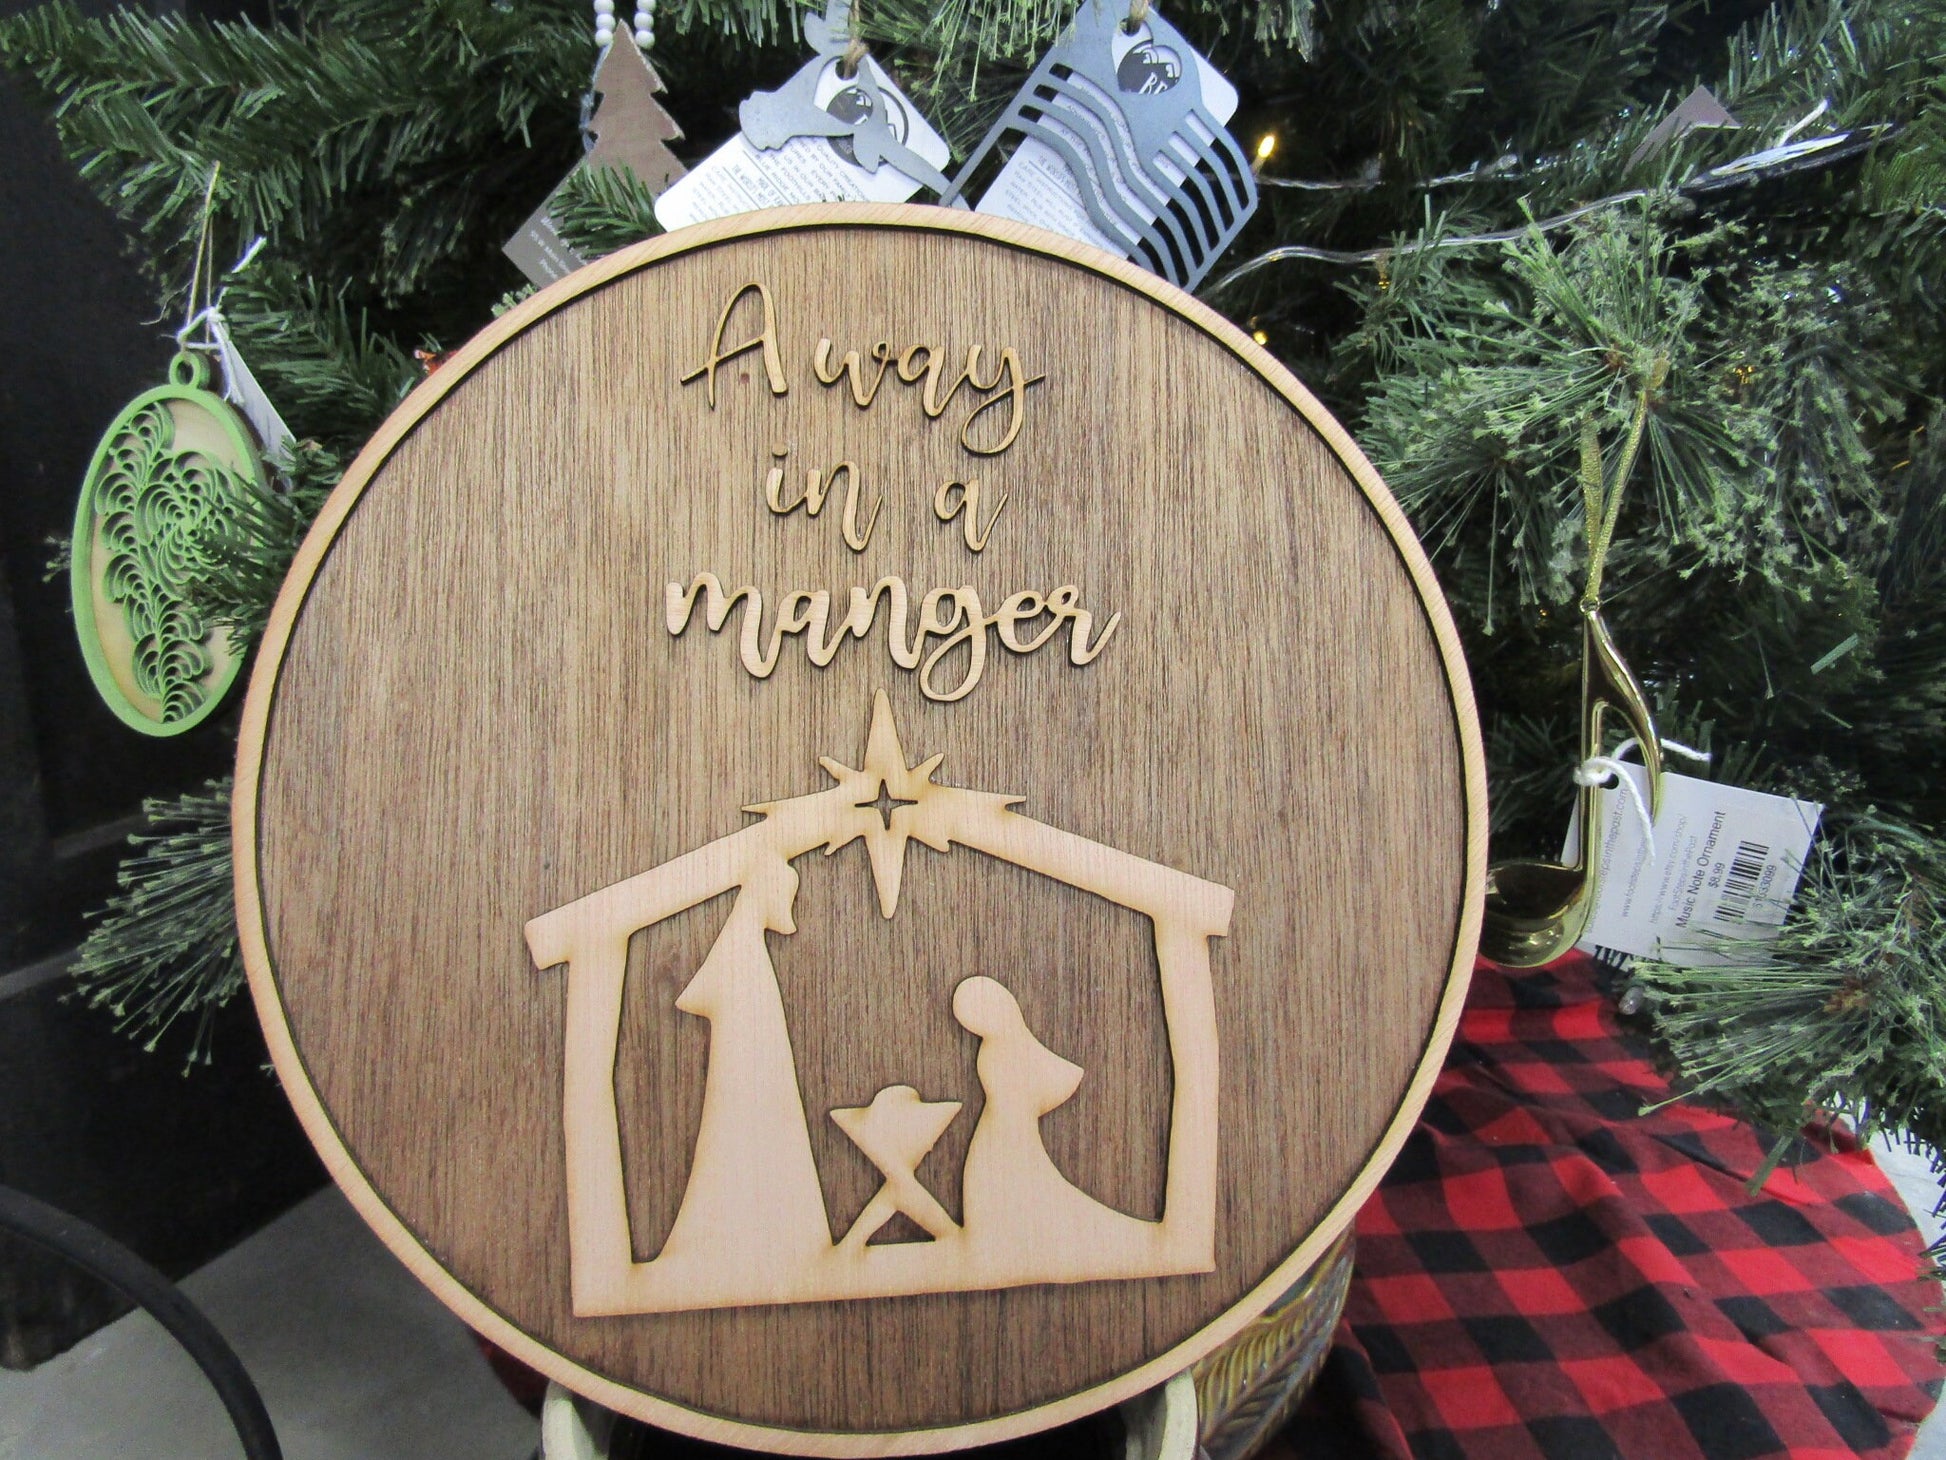 Christmas Away In A Manger Jesus Birth of Christ Faith Winter Decor Wooden Natural Gift Round Holiday Handmade Wall Hanging Sign 3D